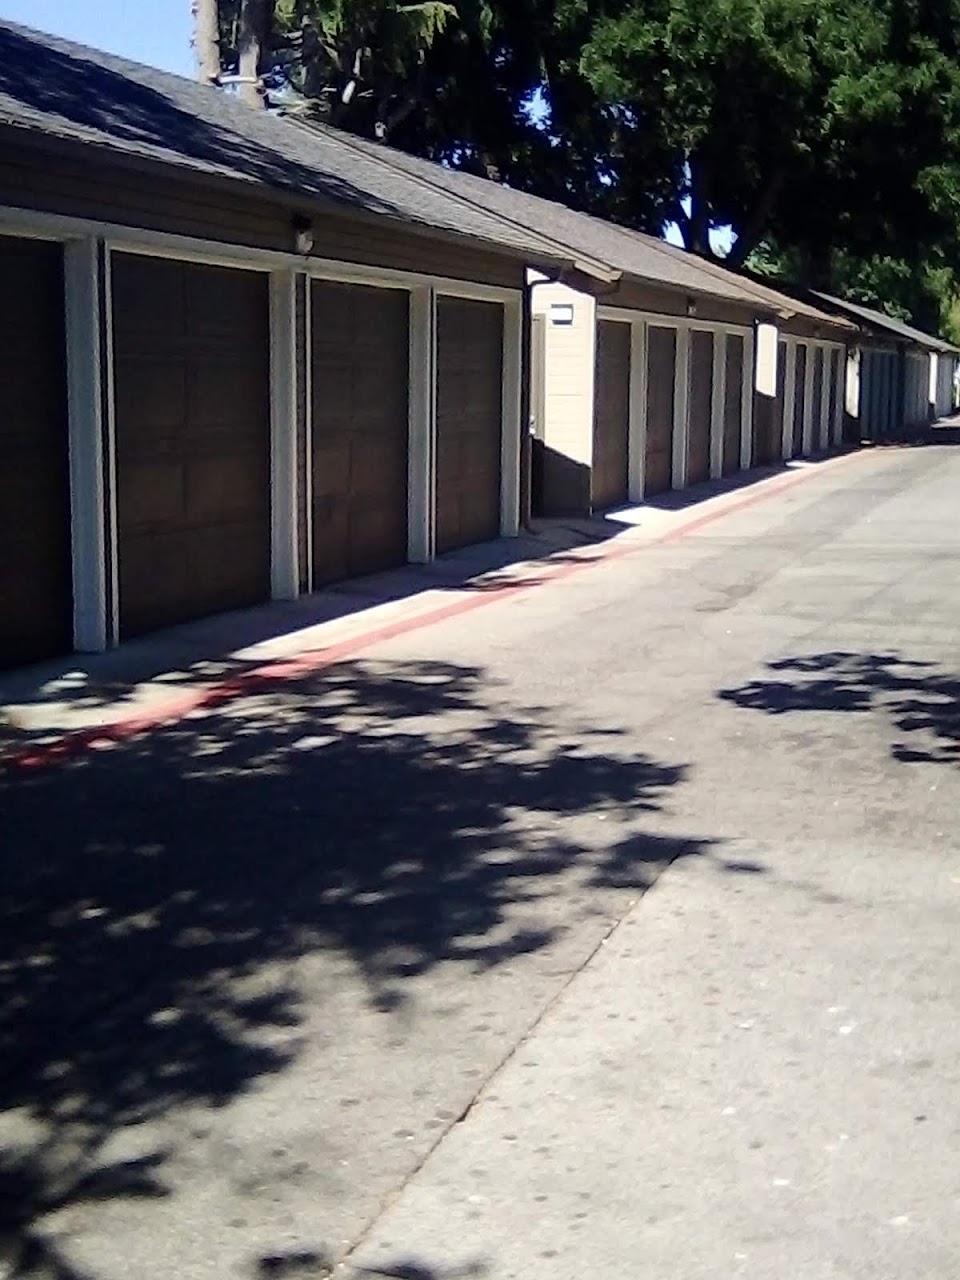 Photo of GLORIA WAY COMMUNITY HOUSING. Affordable housing located at 2400 GLORIA WAY EAST PALO ALTO, CA 94303